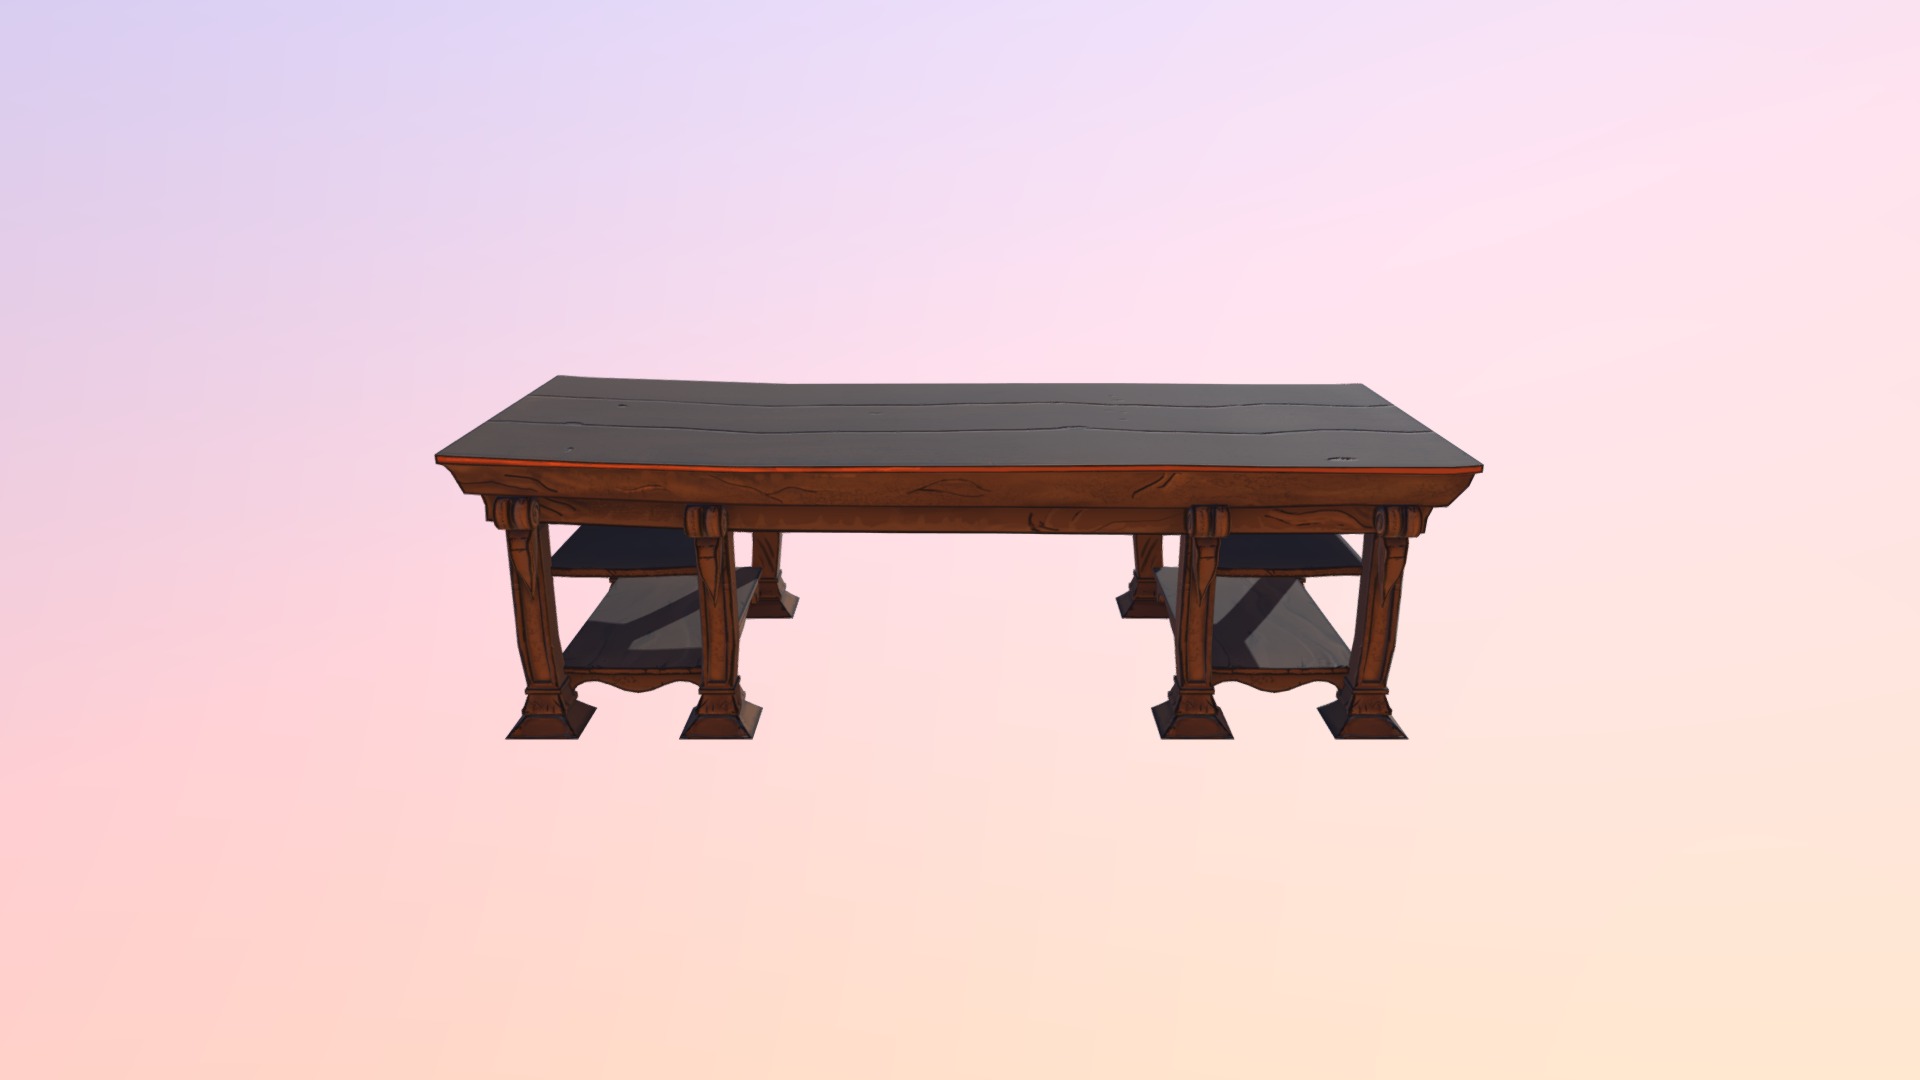 3D model Table stylized - This is a 3D model of the Table stylized. The 3D model is about a wooden table with a blue top.